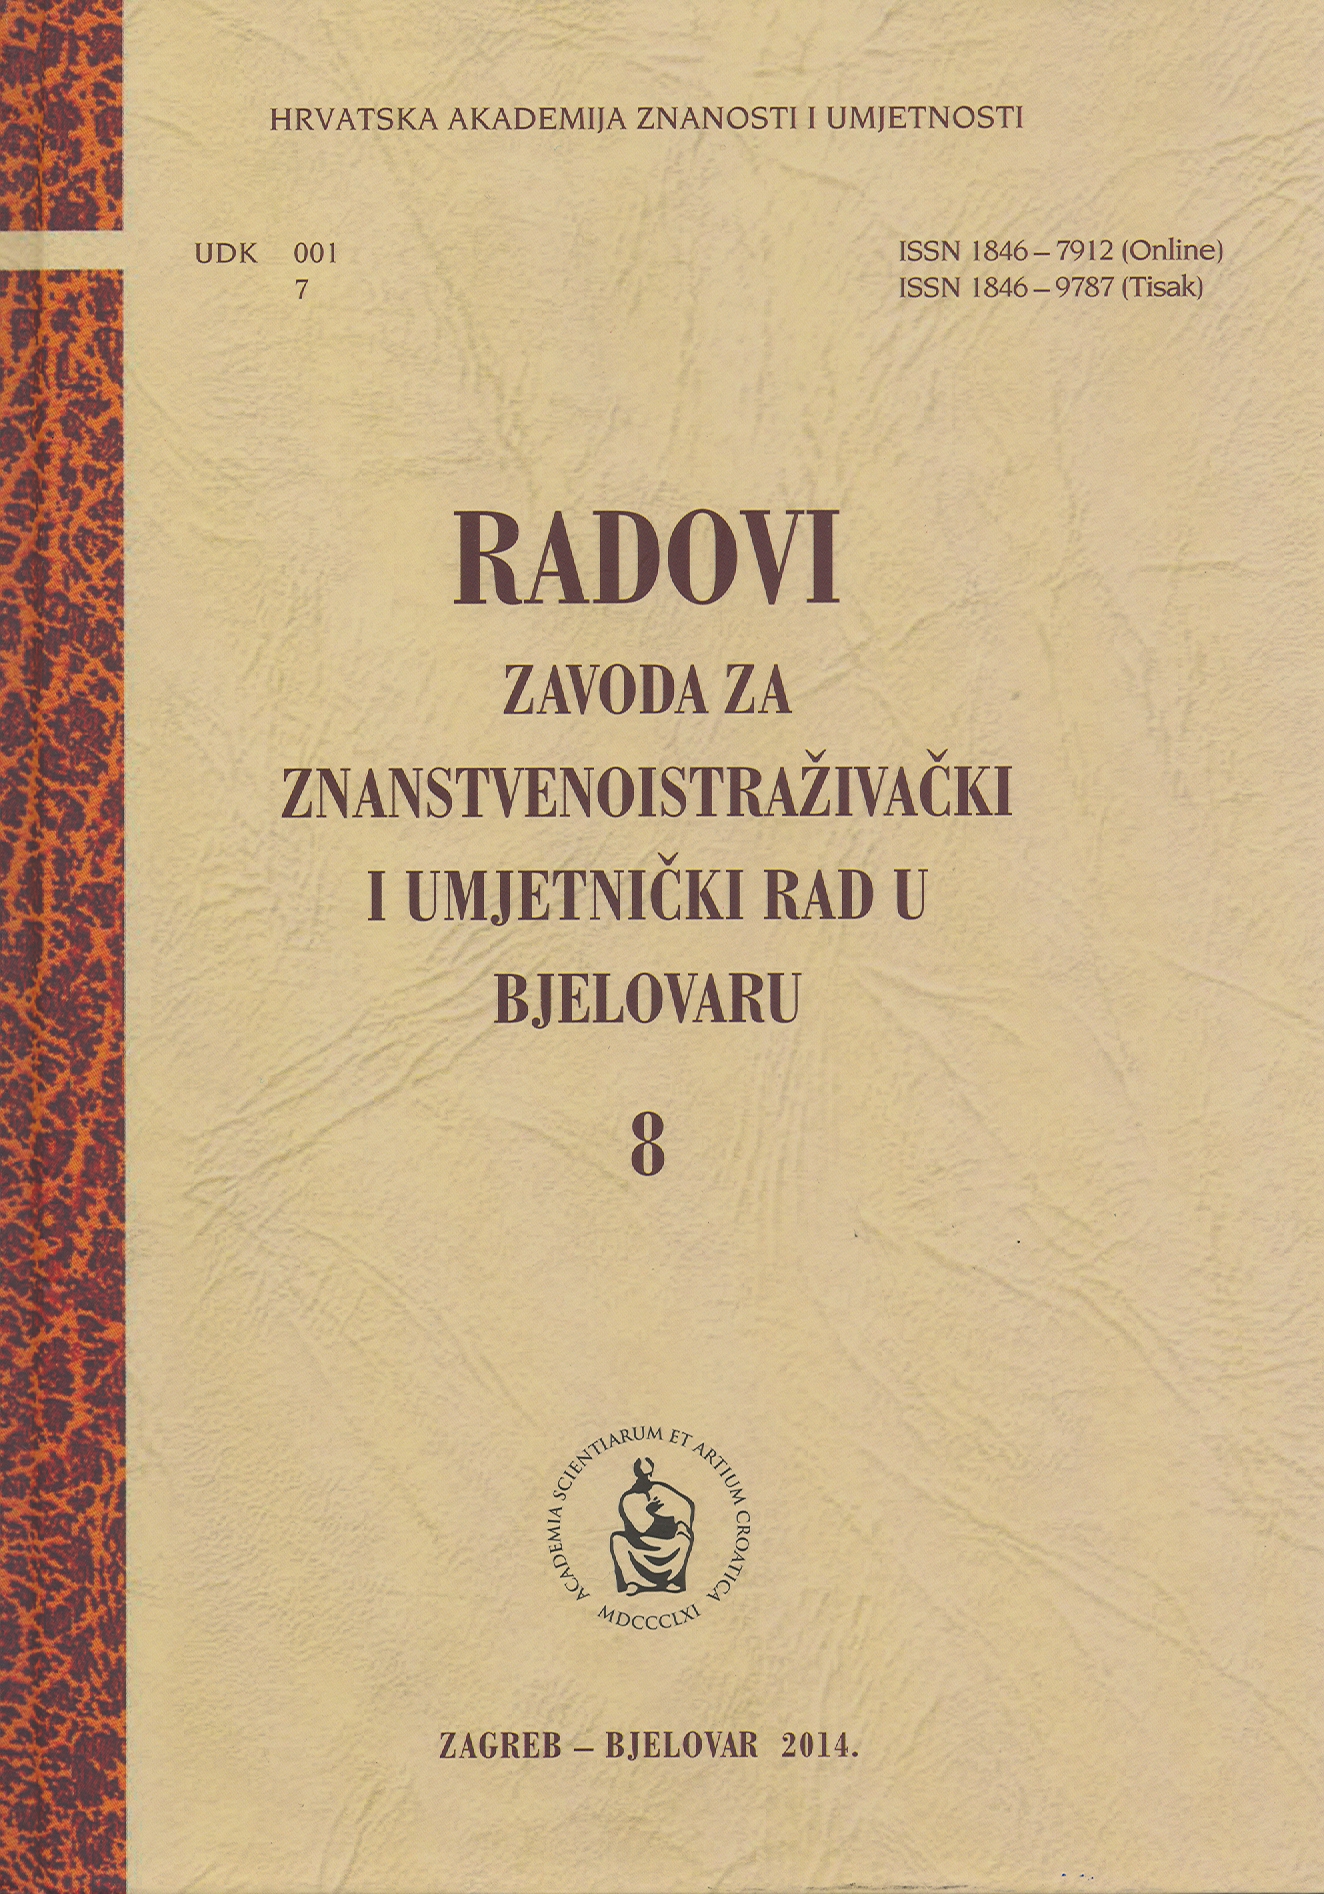 Direct Demographic Losses in the Temporarily Occupied Area of the Municipalities Daruvar and Grubišno Polje in 1991 Based on the Archival Material of the Republic of Serbian Krajina Cover Image